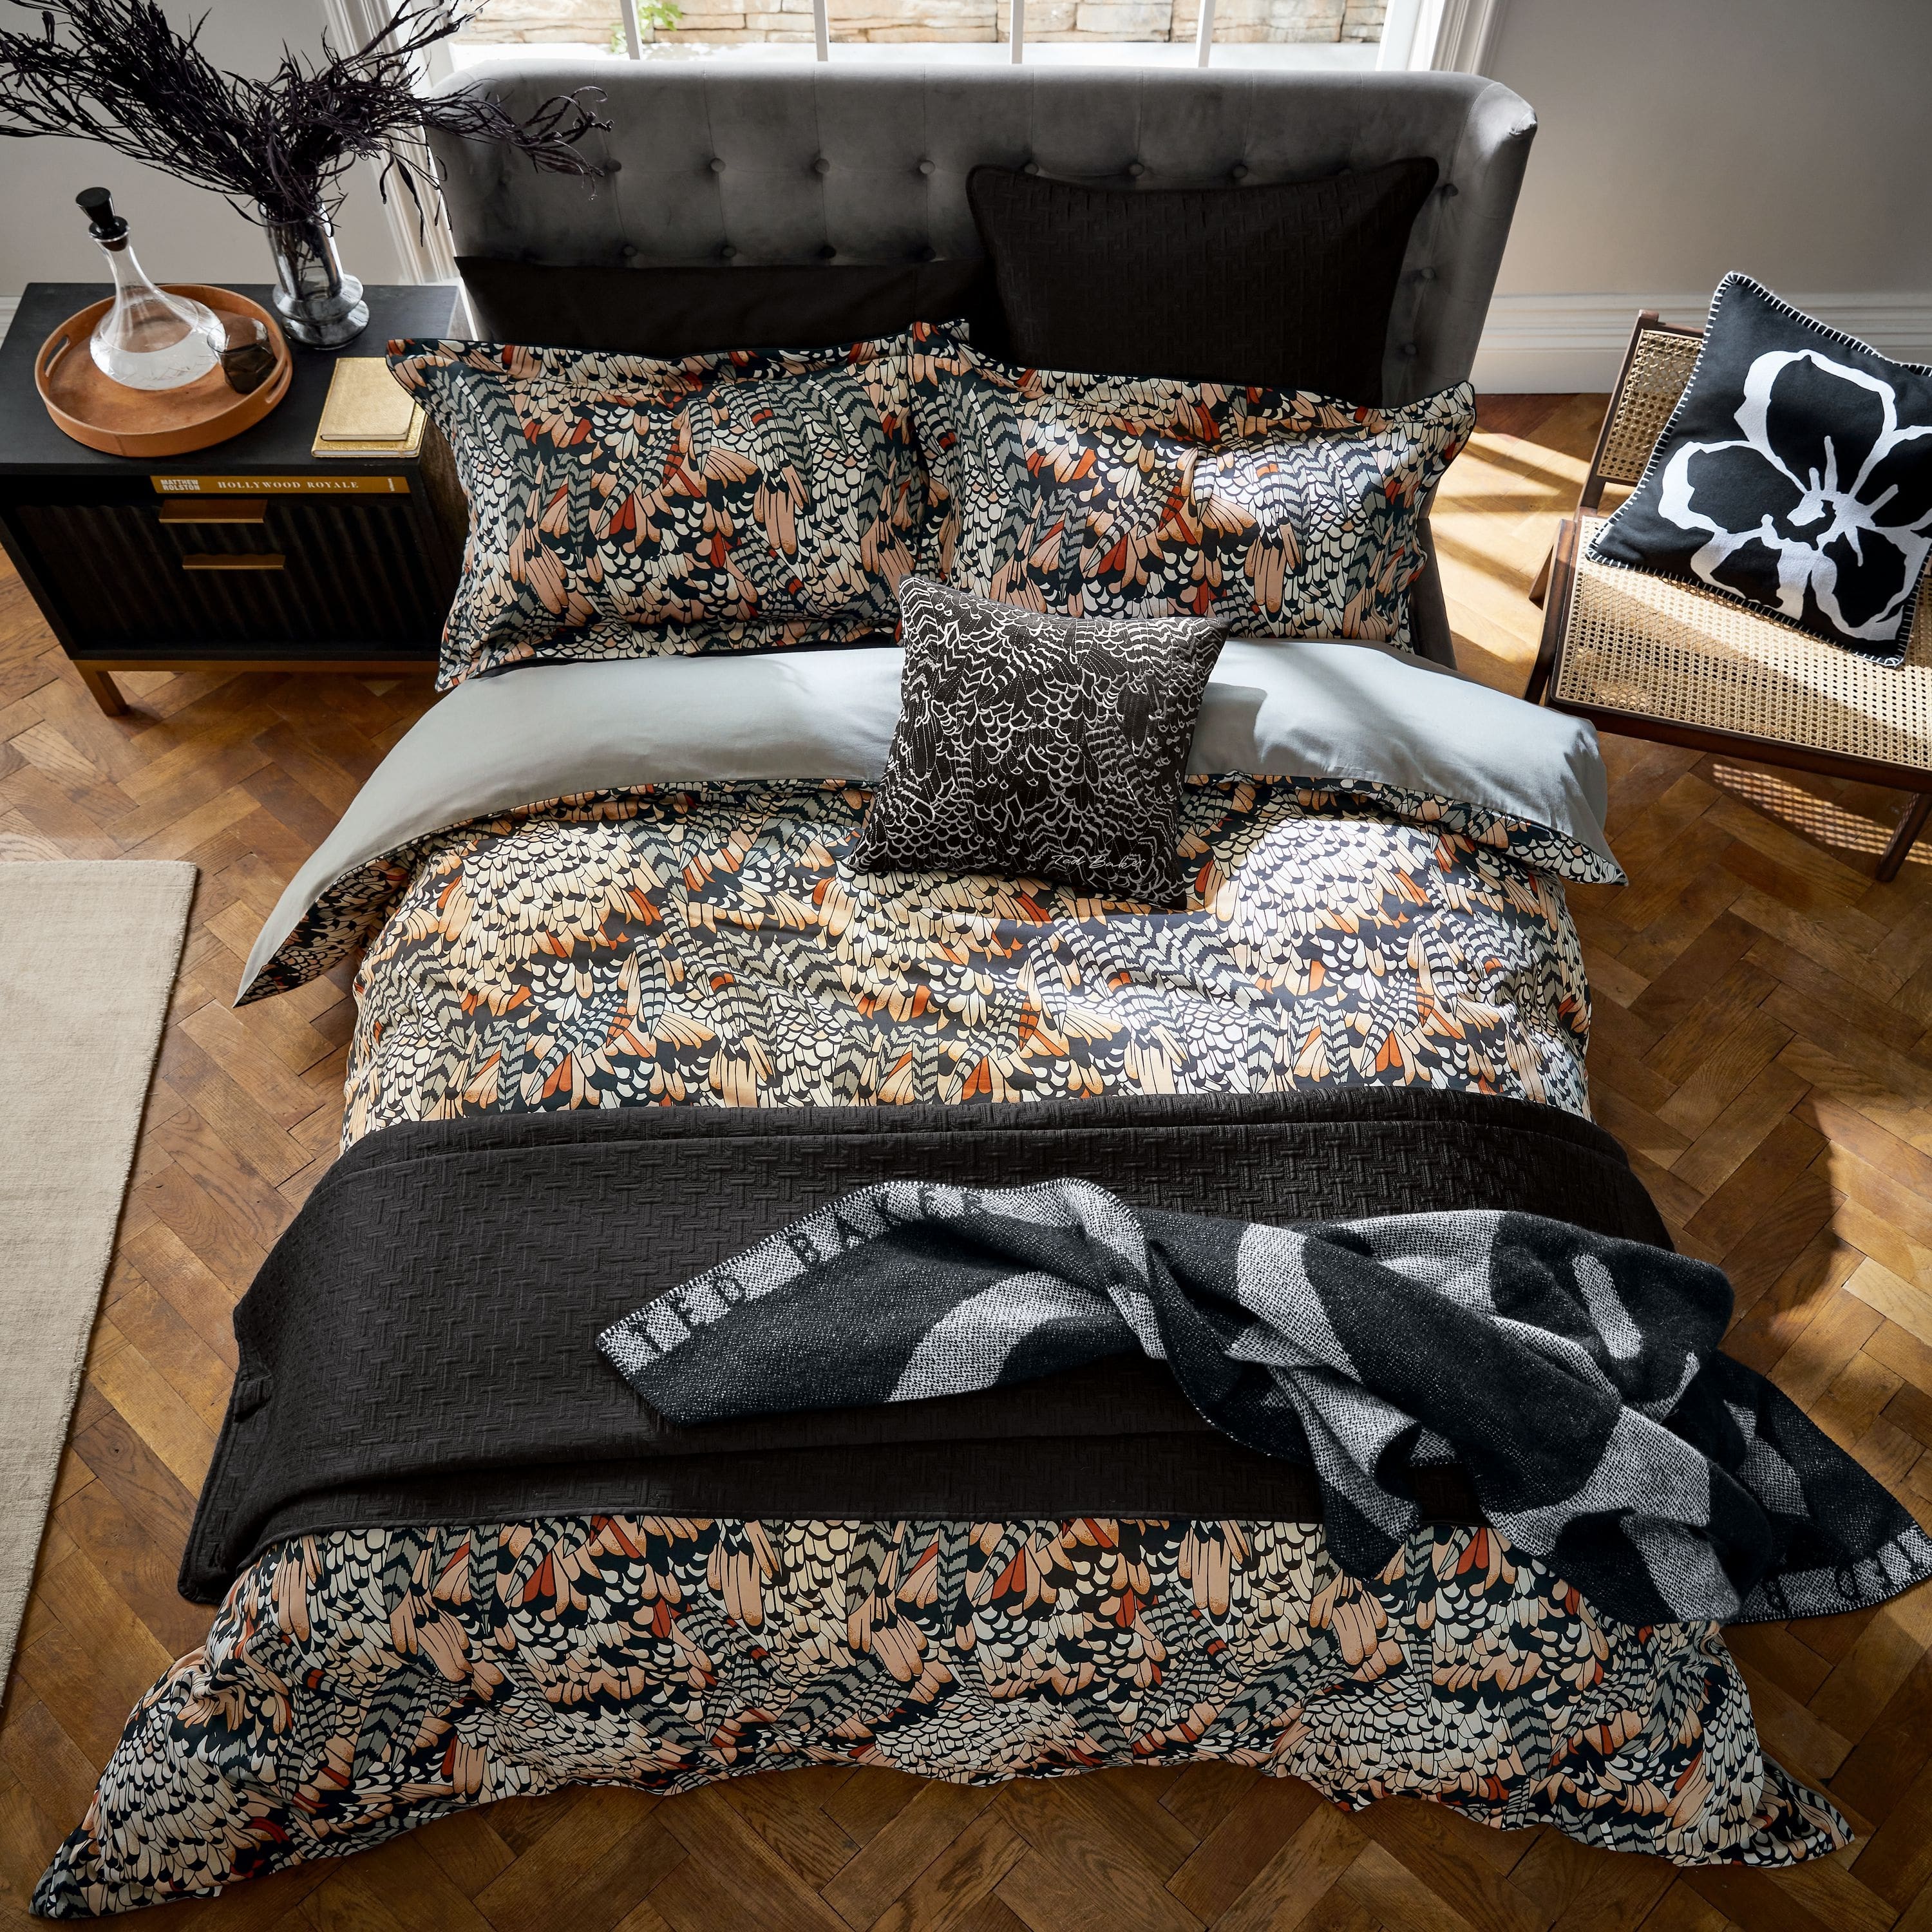 Ted Baker Feathers Duvet Cover Set - Bed Bath & Beyond - 38334433